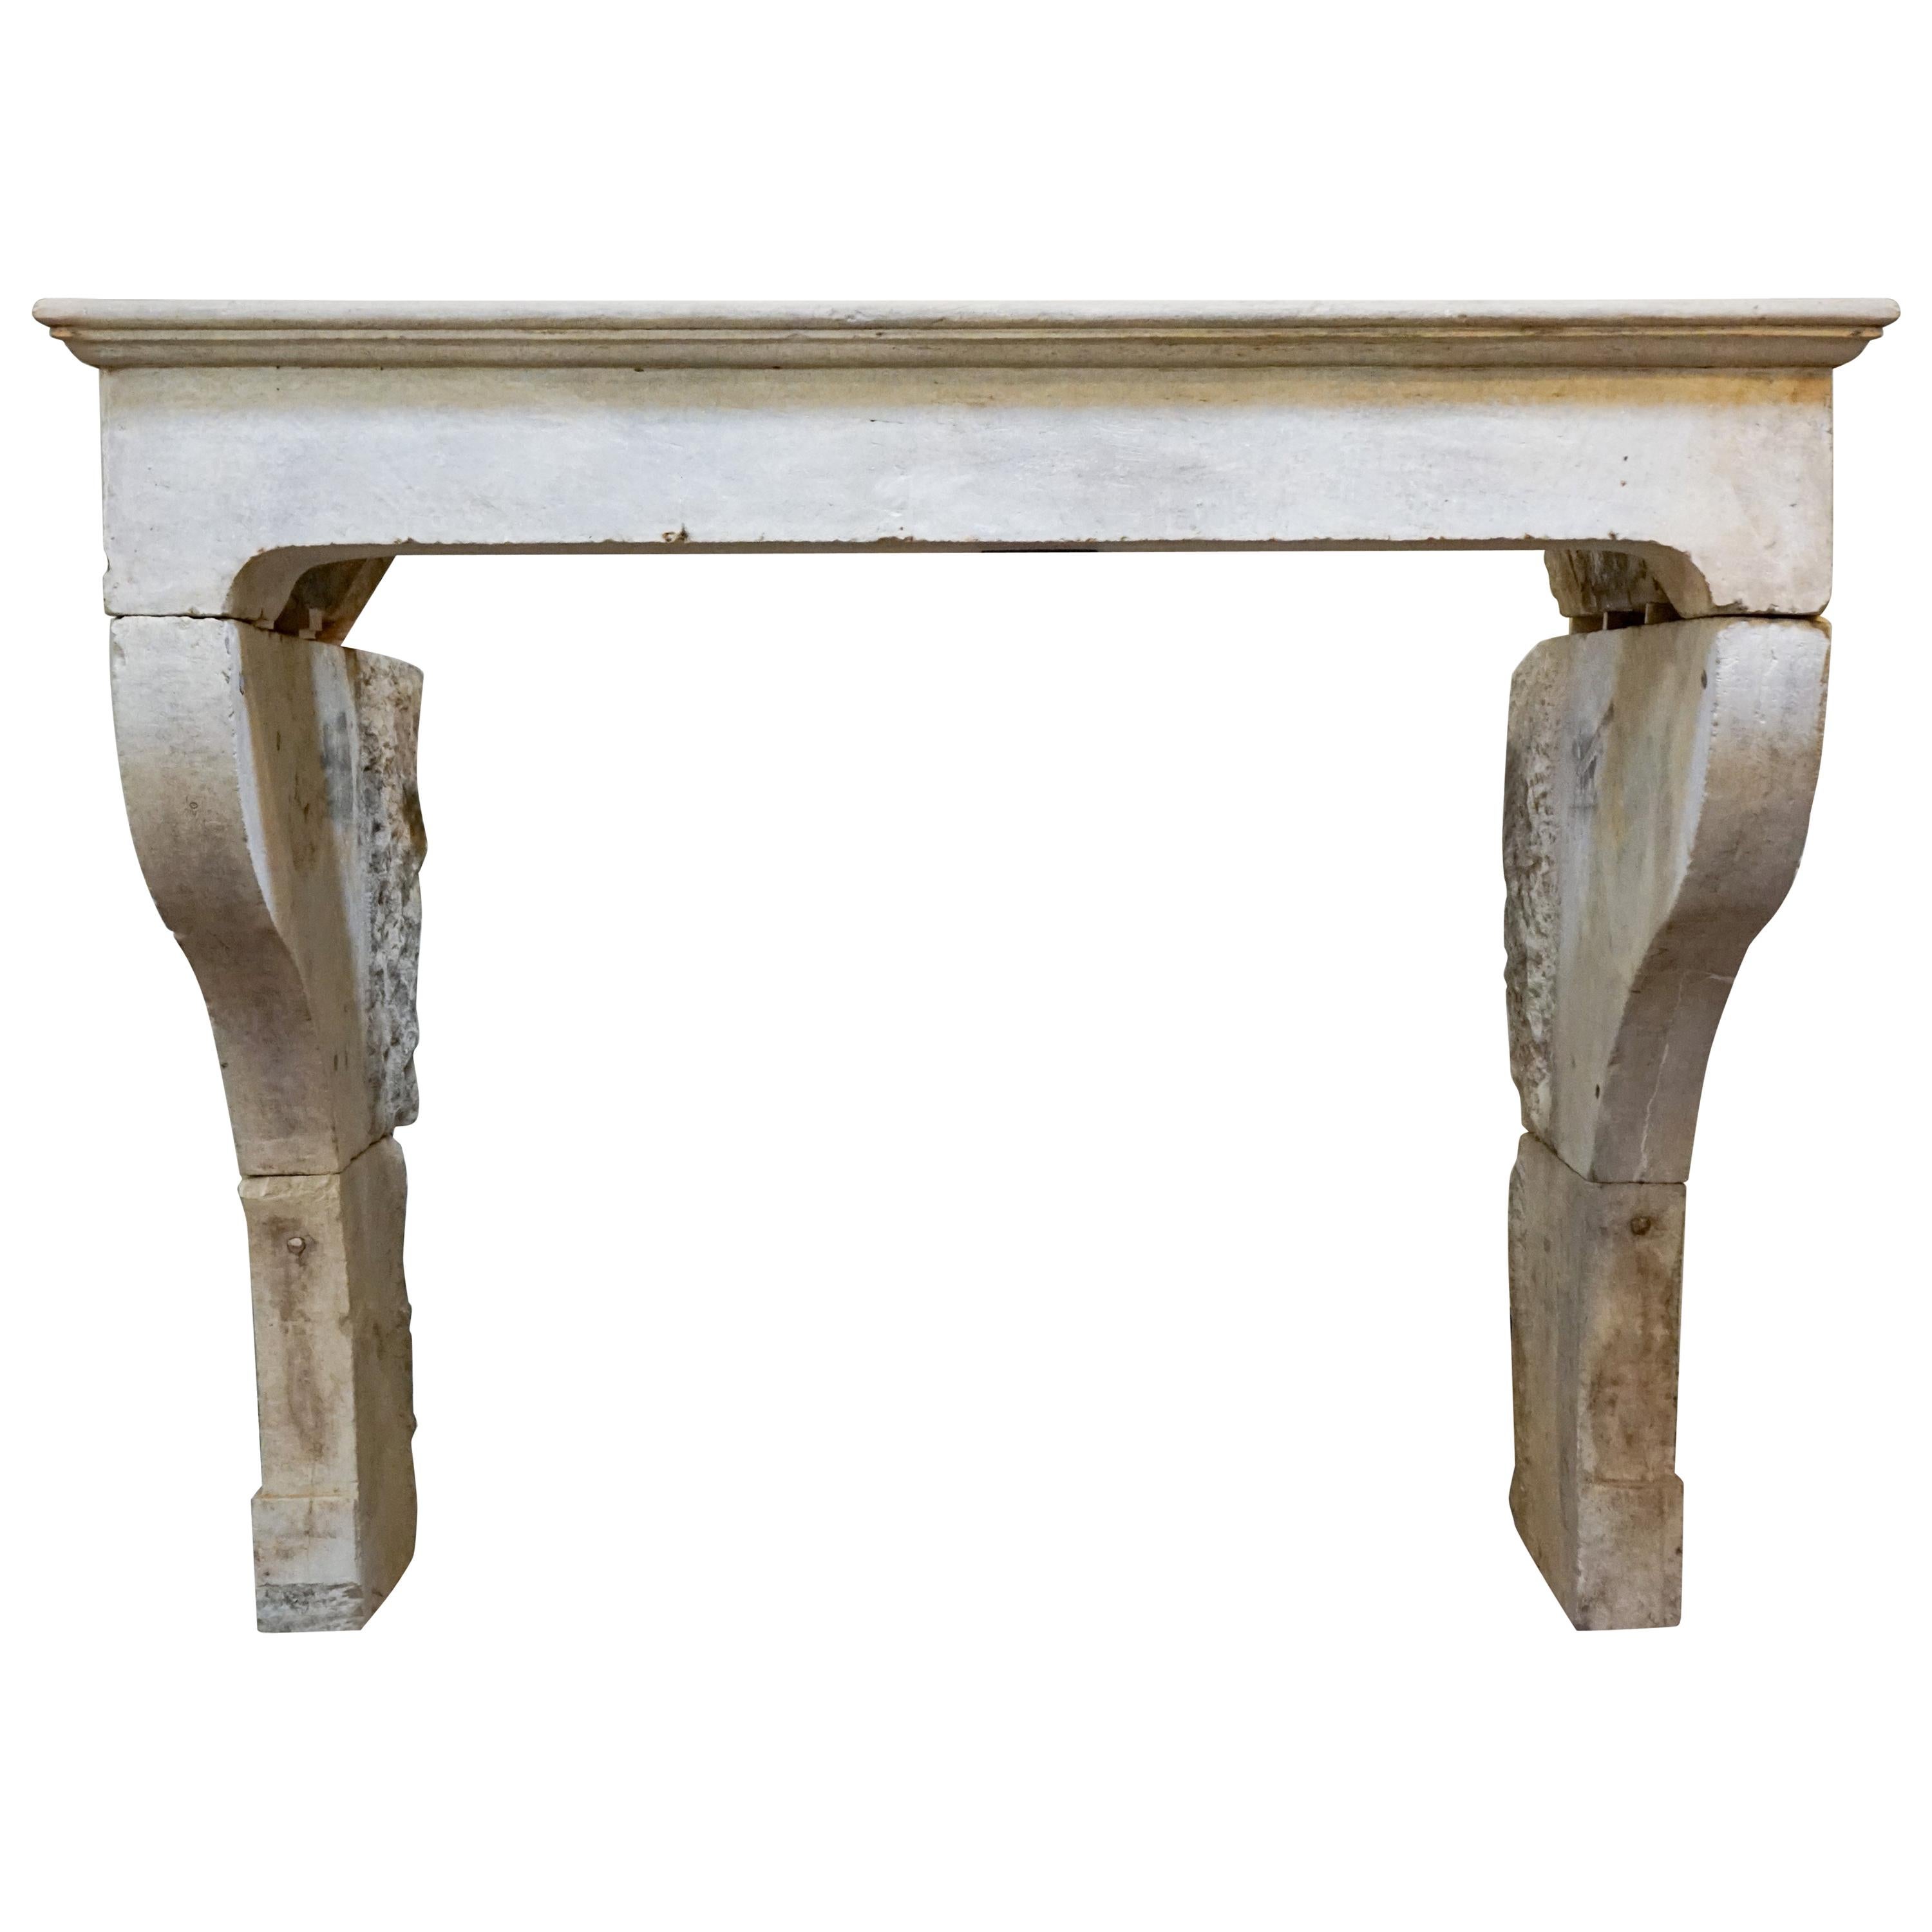 This French Limestone Mantel from the 1680s has been expertly reclaimed from France and features an antique Louis XIII style. Made of genuine limestone, it adds a touch of historic elegance and sophistication to any room.
